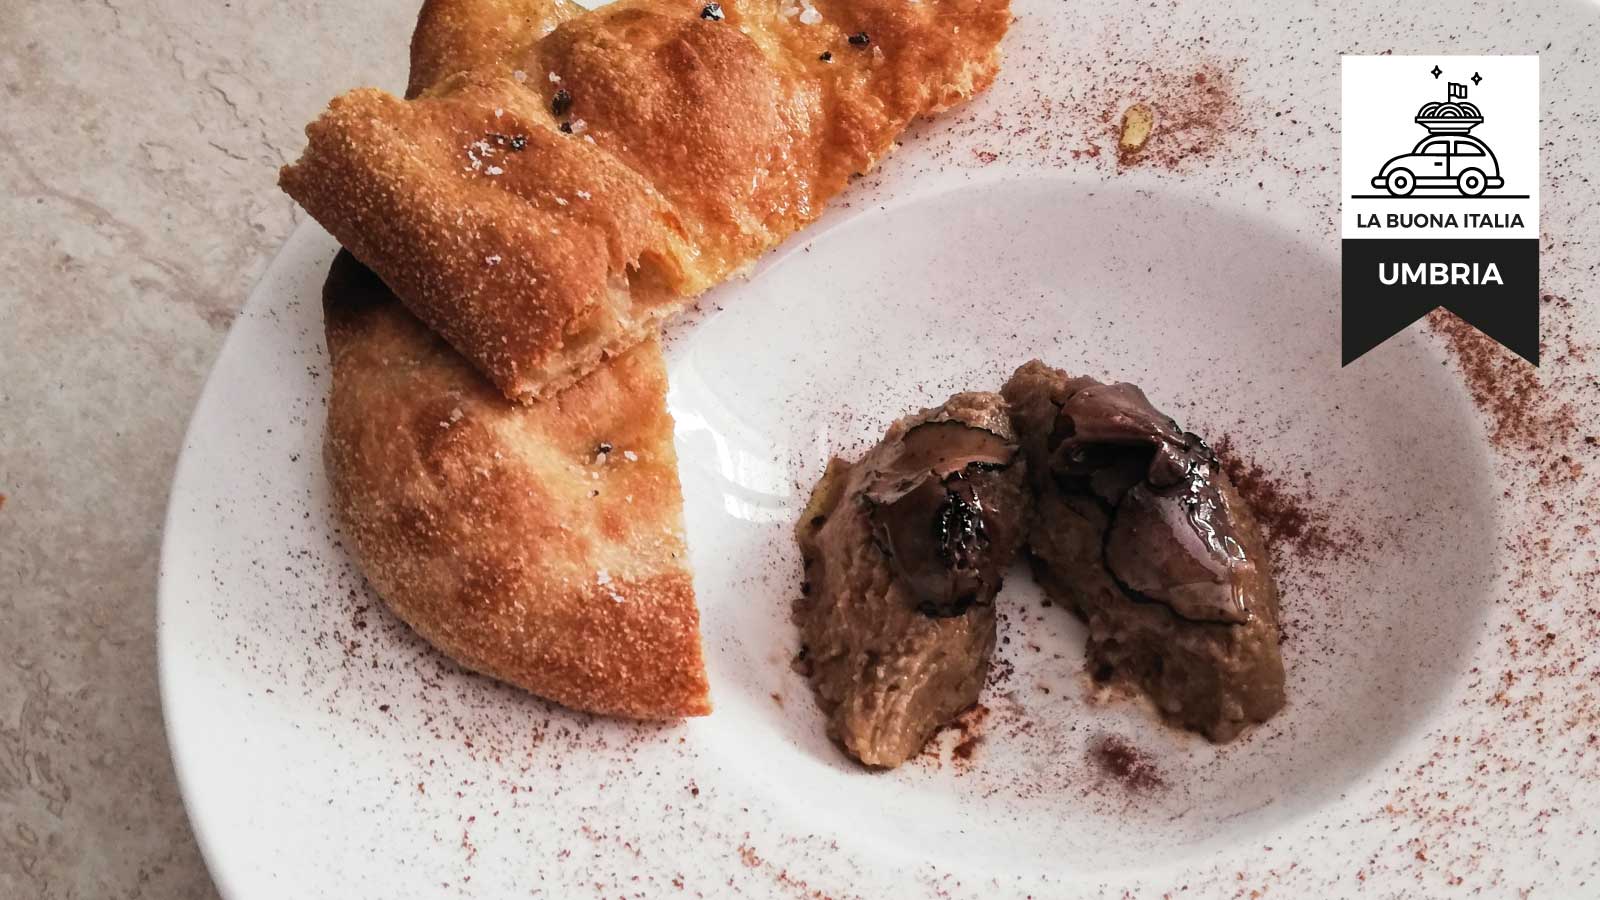 Umbria – Truffle Chicken Liver Pate Quenelles With Truffle-flavored Umbrian Focaccia.